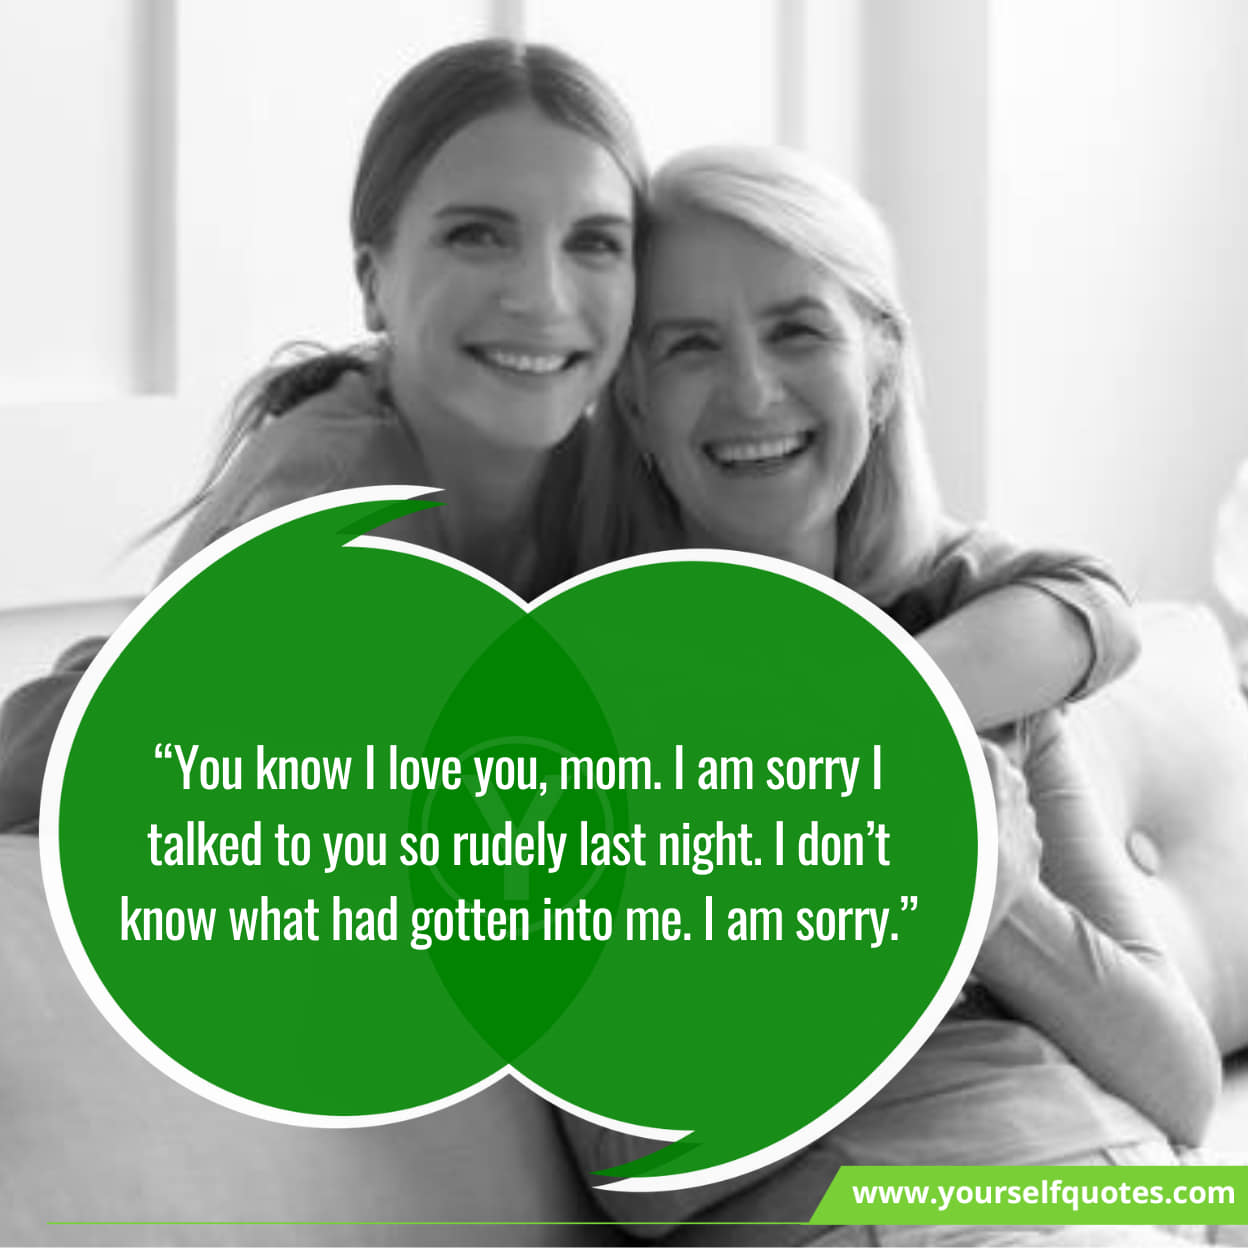 Heart-Warming Sorry Mom Quotes